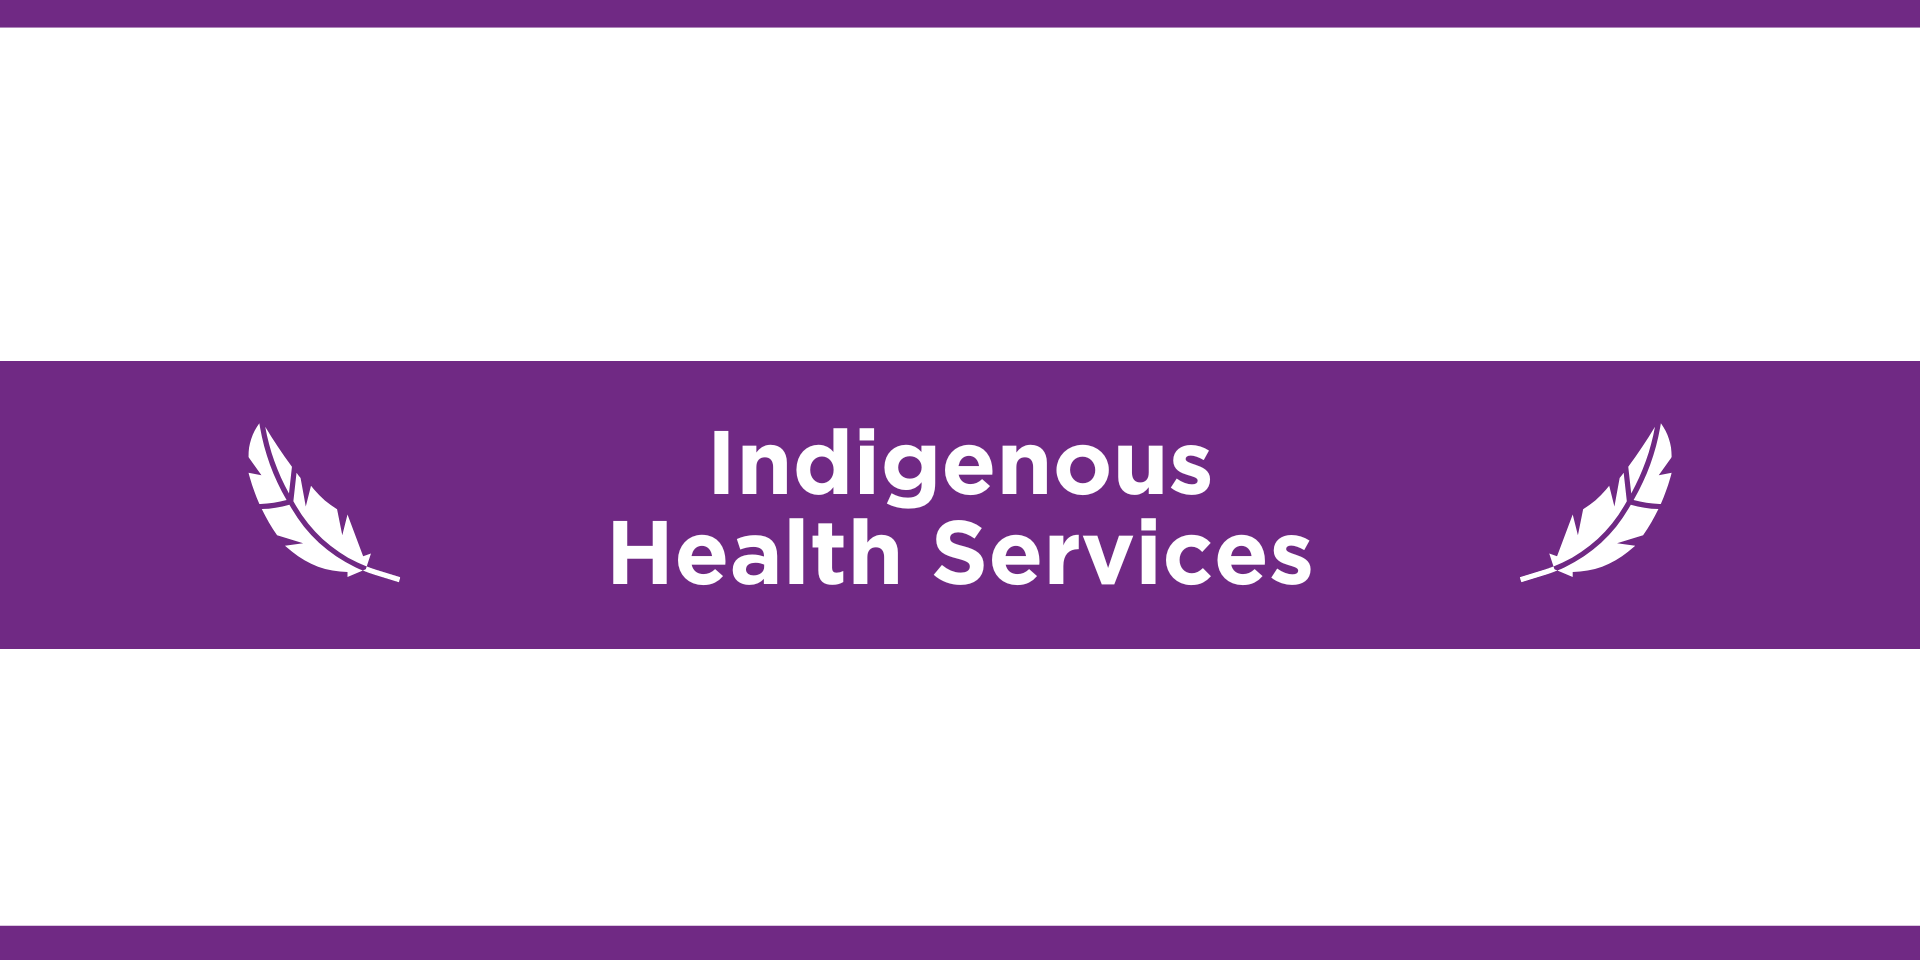 Indigenous Health Services